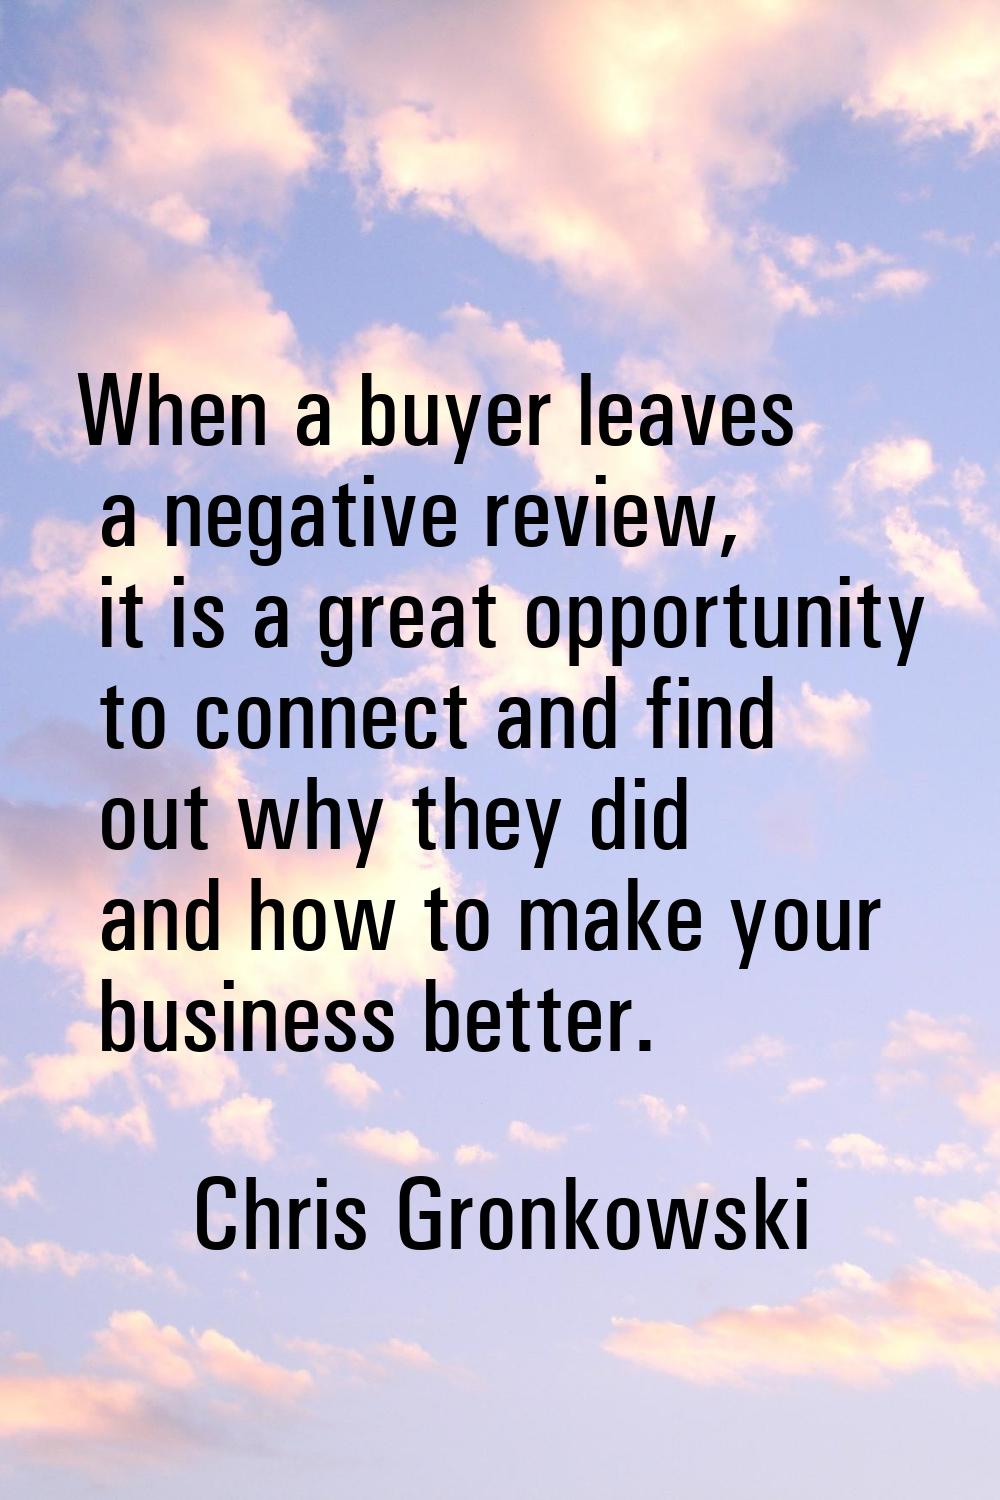 When a buyer leaves a negative review, it is a great opportunity to connect and find out why they d